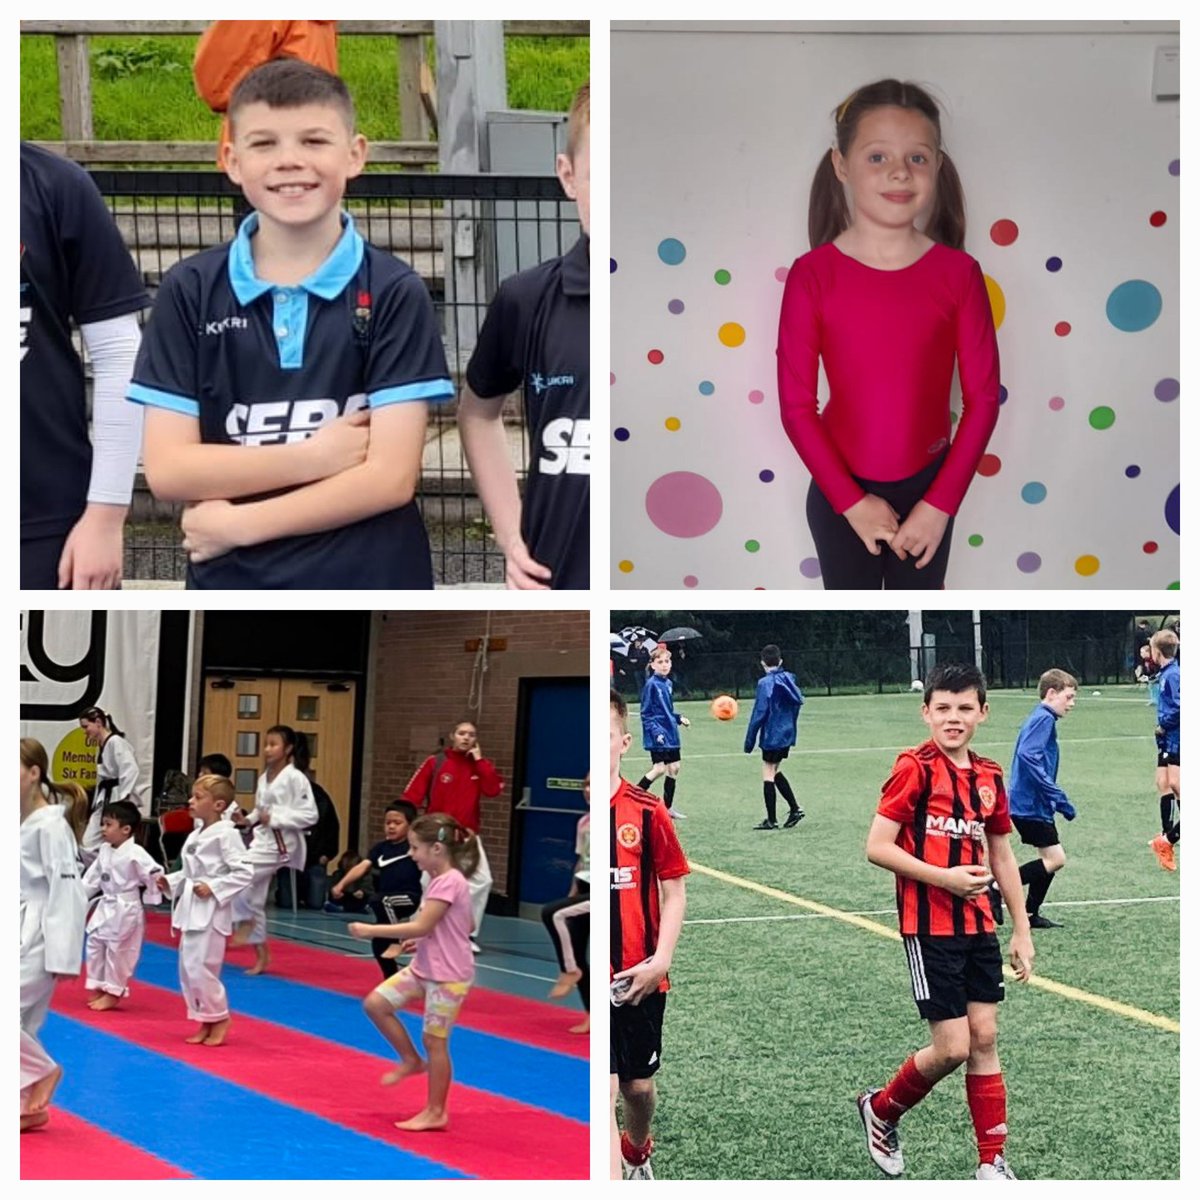 On @ICCE_coaching Global Coaches Day, a big #ThanksCoach to the coaches who give of their time to make it all happen for our two @LXGymnastics @hbjfc @LisburnTkd & my colleagues @lisnagarveyhc 🤸‍♀️⚽️🥋🏑 Thank you!